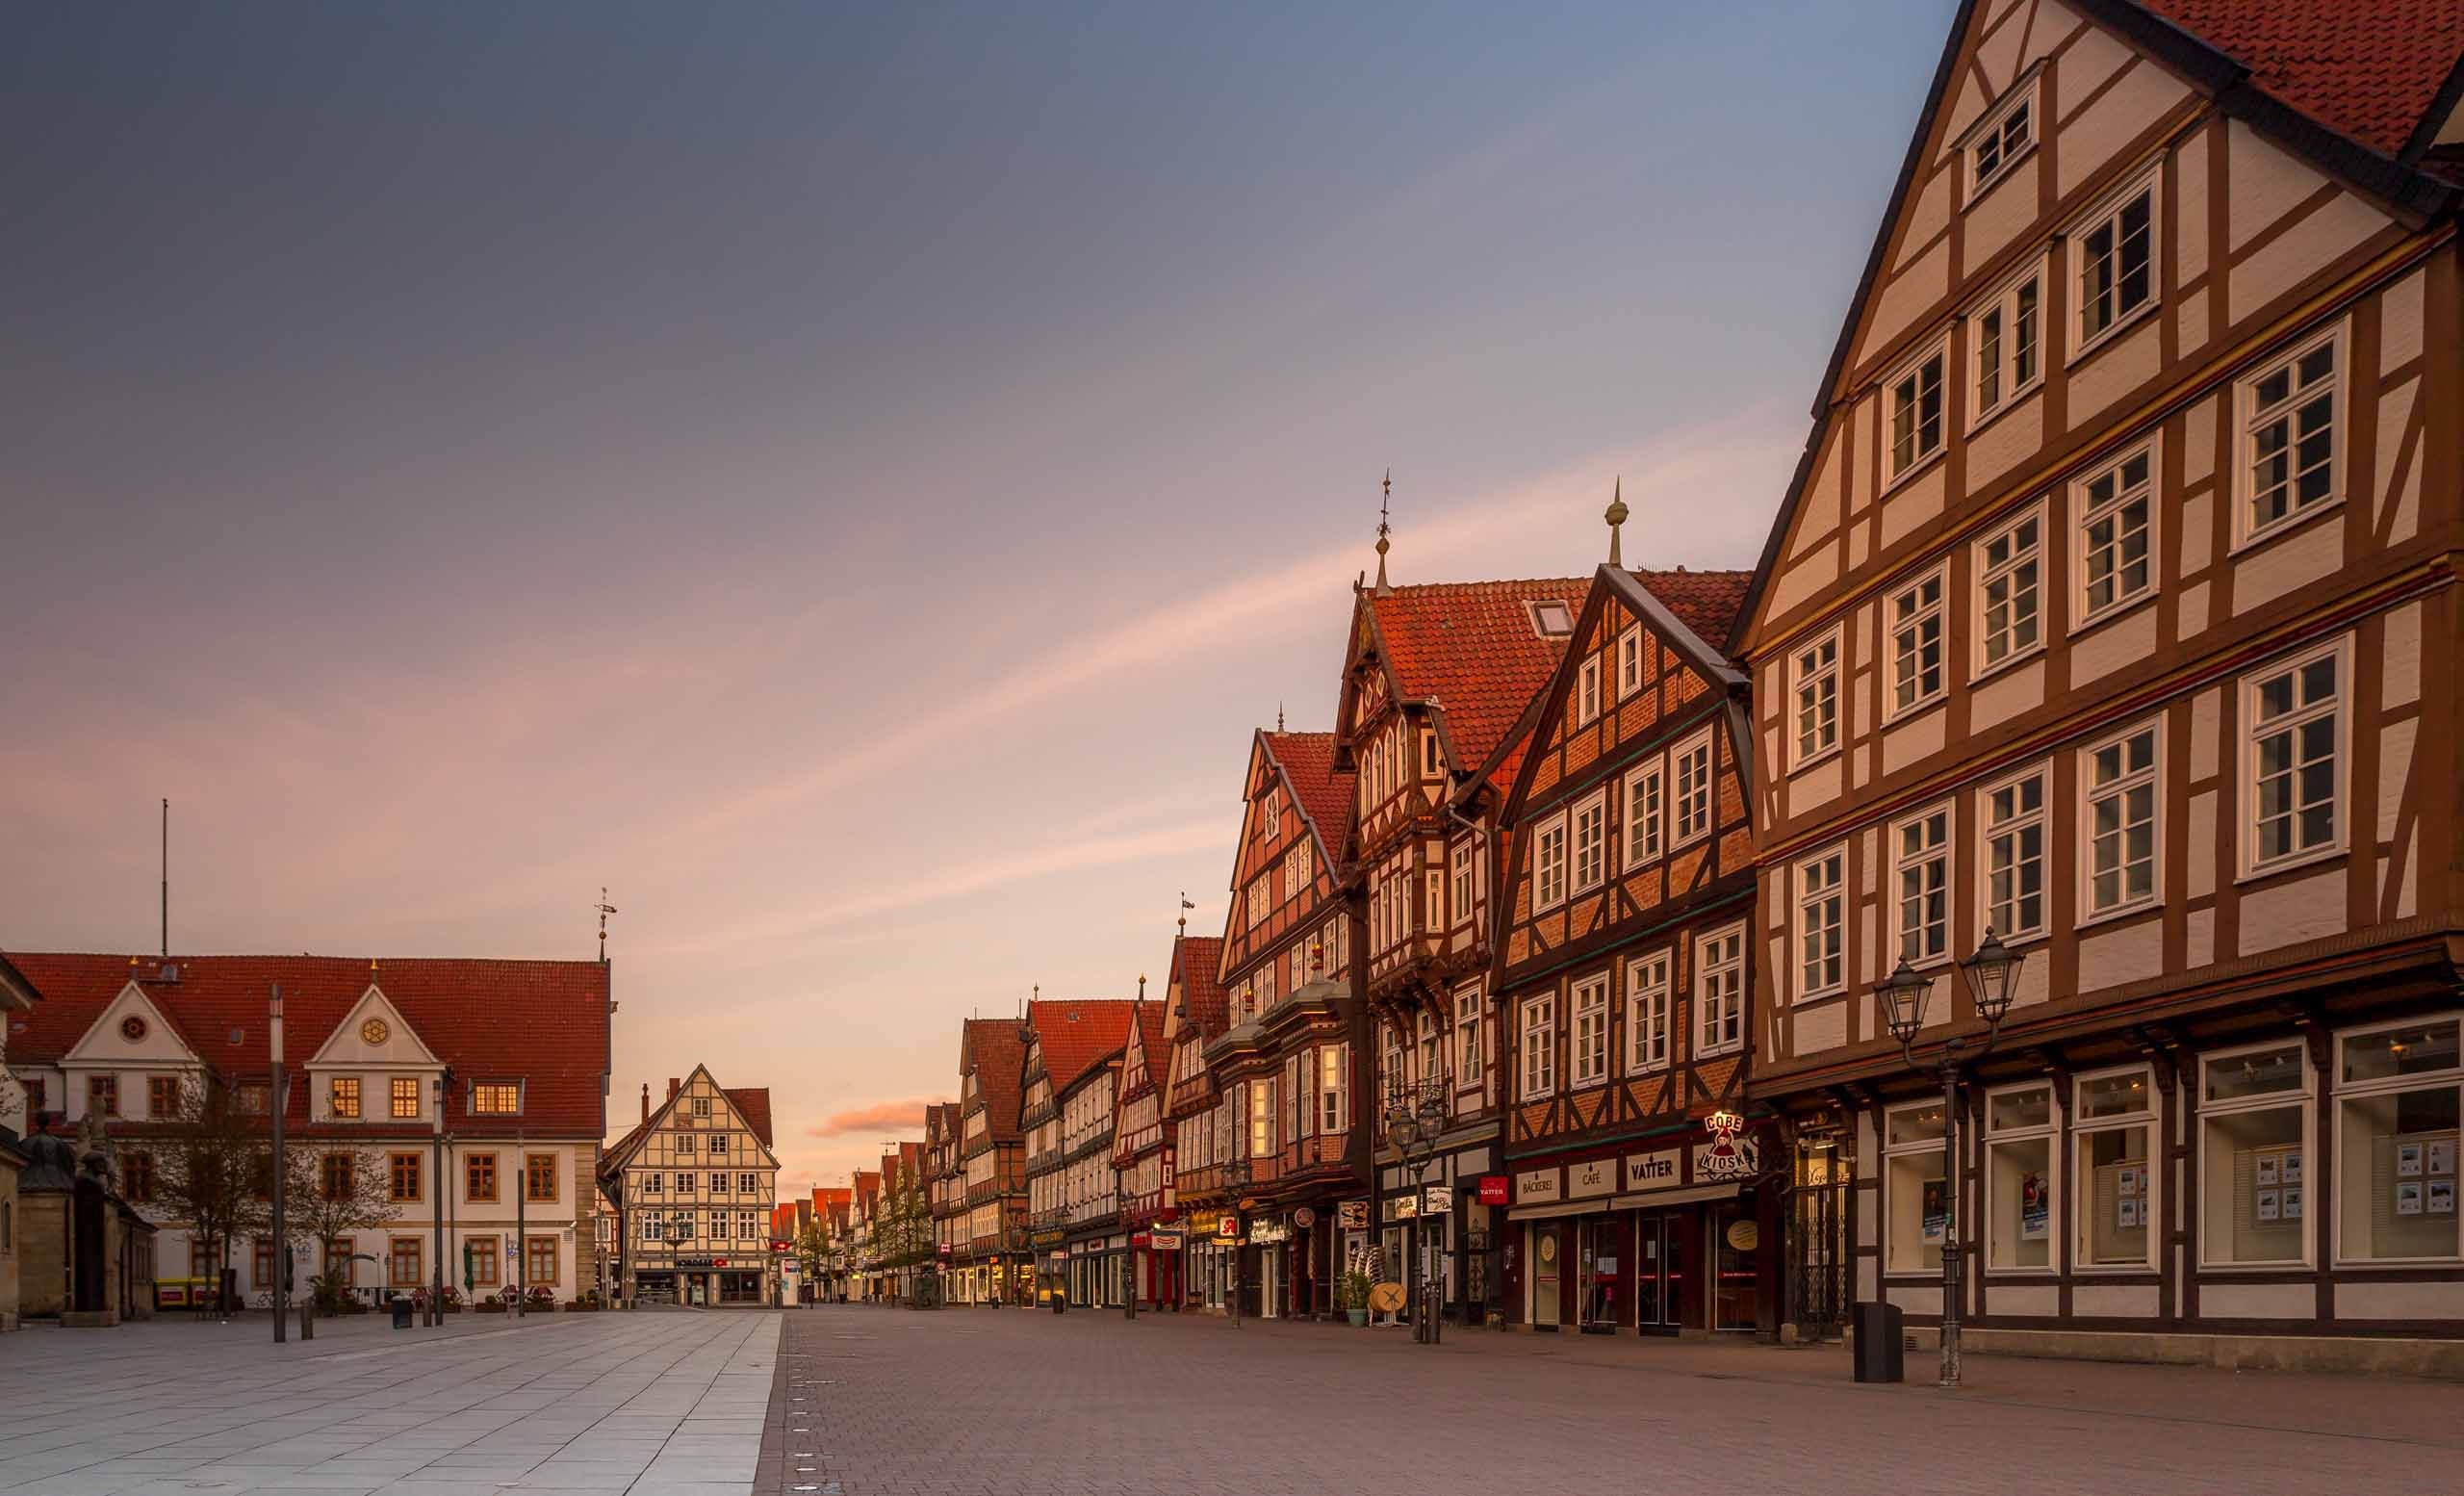 Town: Stechbahn in Celle, Lower Saxony, Germany, Timber-framed houses. 2560x1560 HD Background.